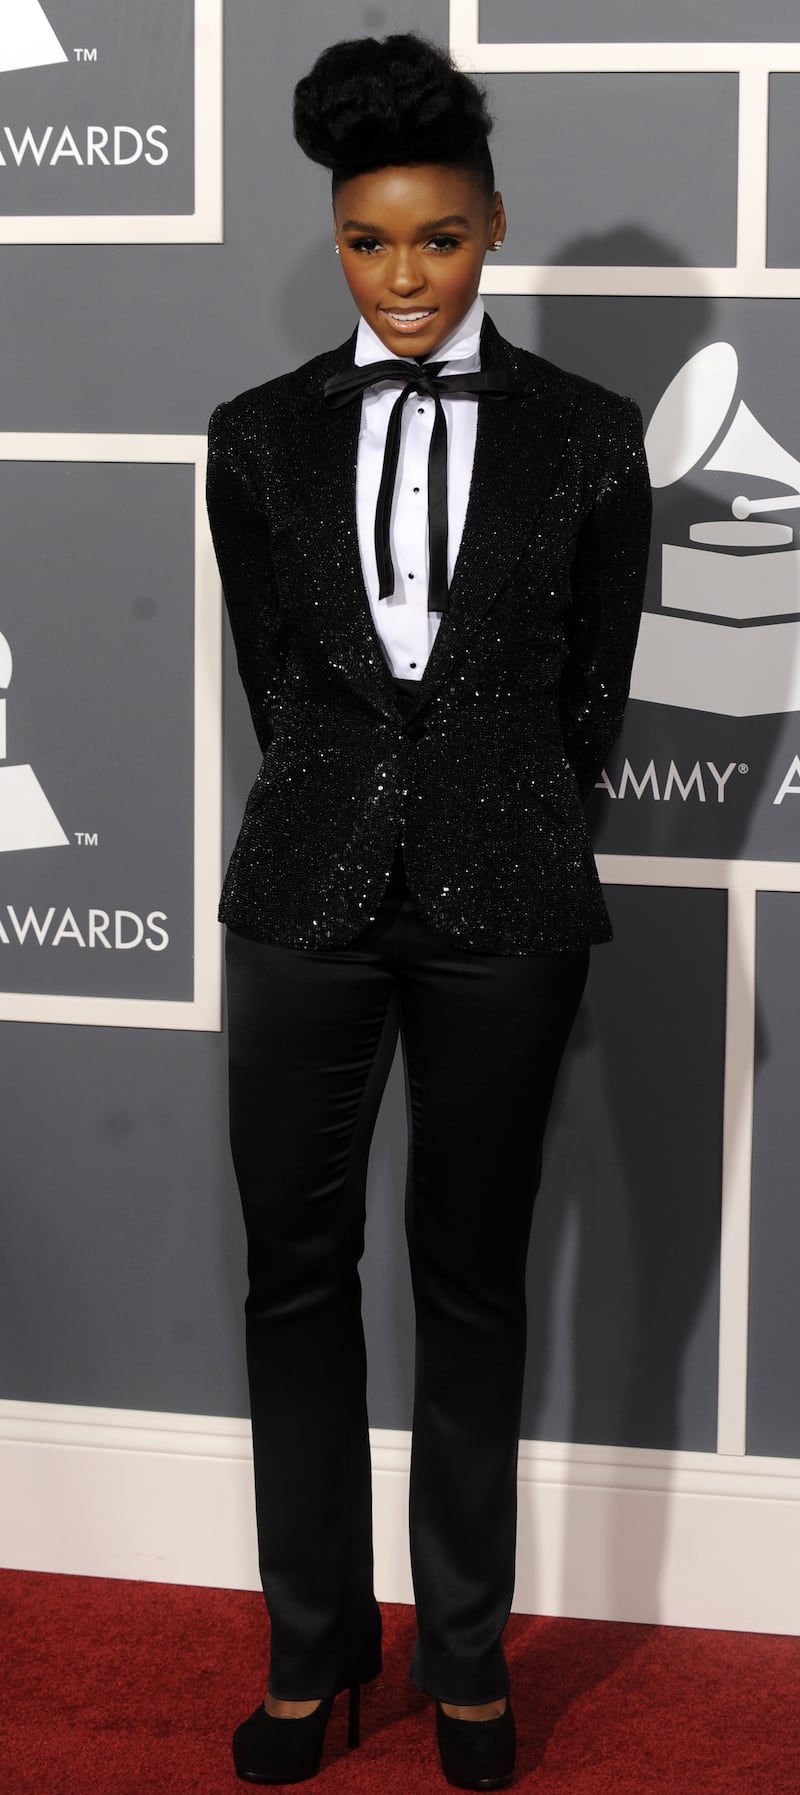 Janelle Monae, wering a sequinned suit jacket, arrives at the 53rd Annual Grammy Awards on February 13, 2011.  EPA